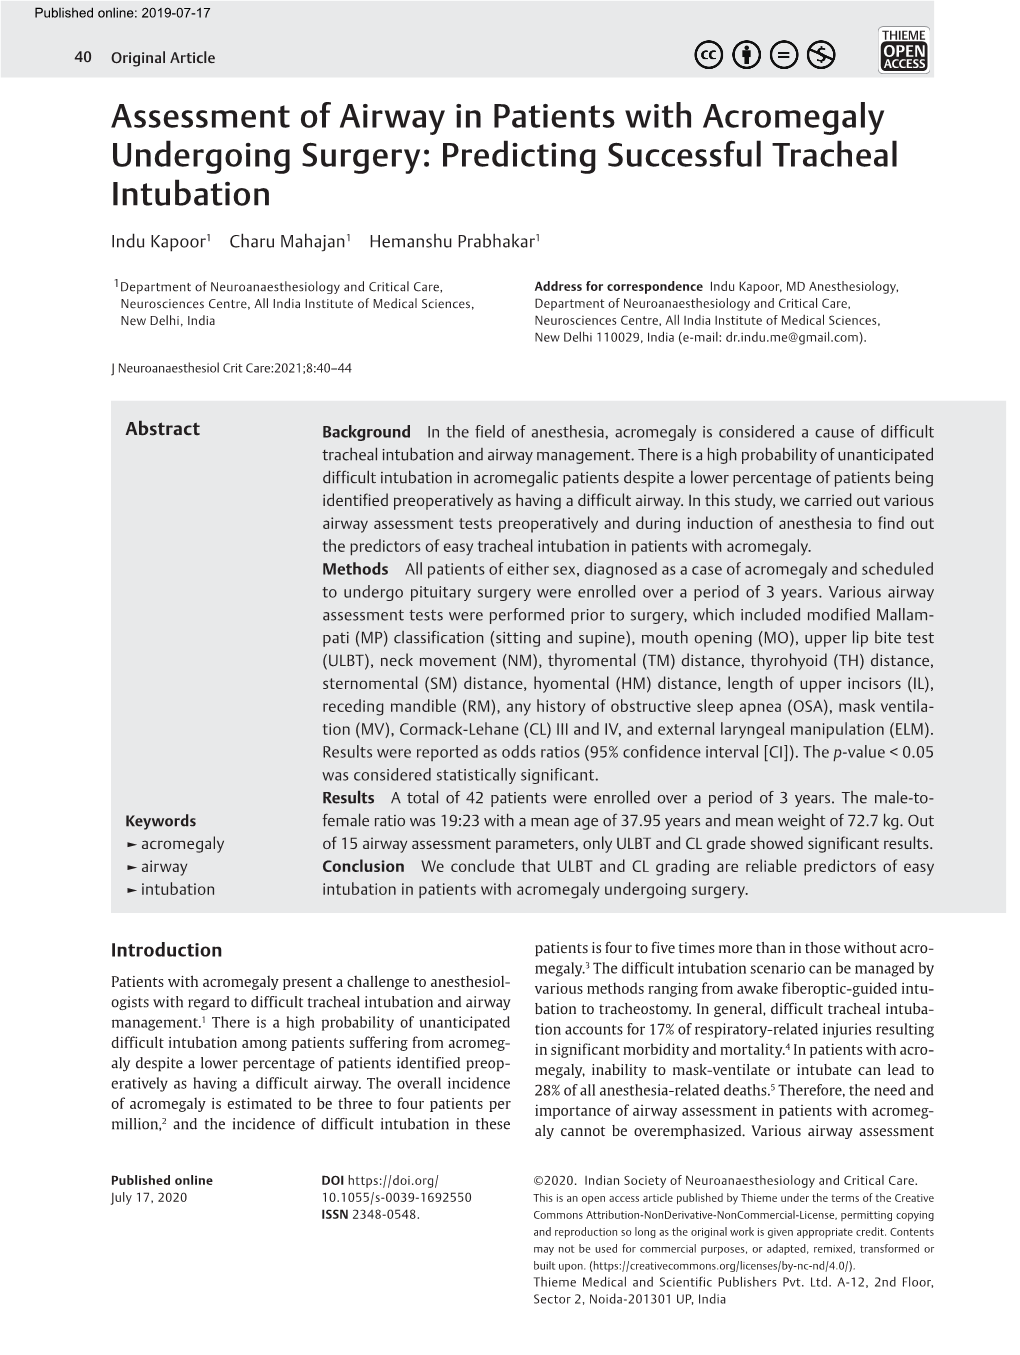 Assessment of Airway in Patients with Acromegaly Undergoing Surgery: Predicting Successful Tracheal Intubation